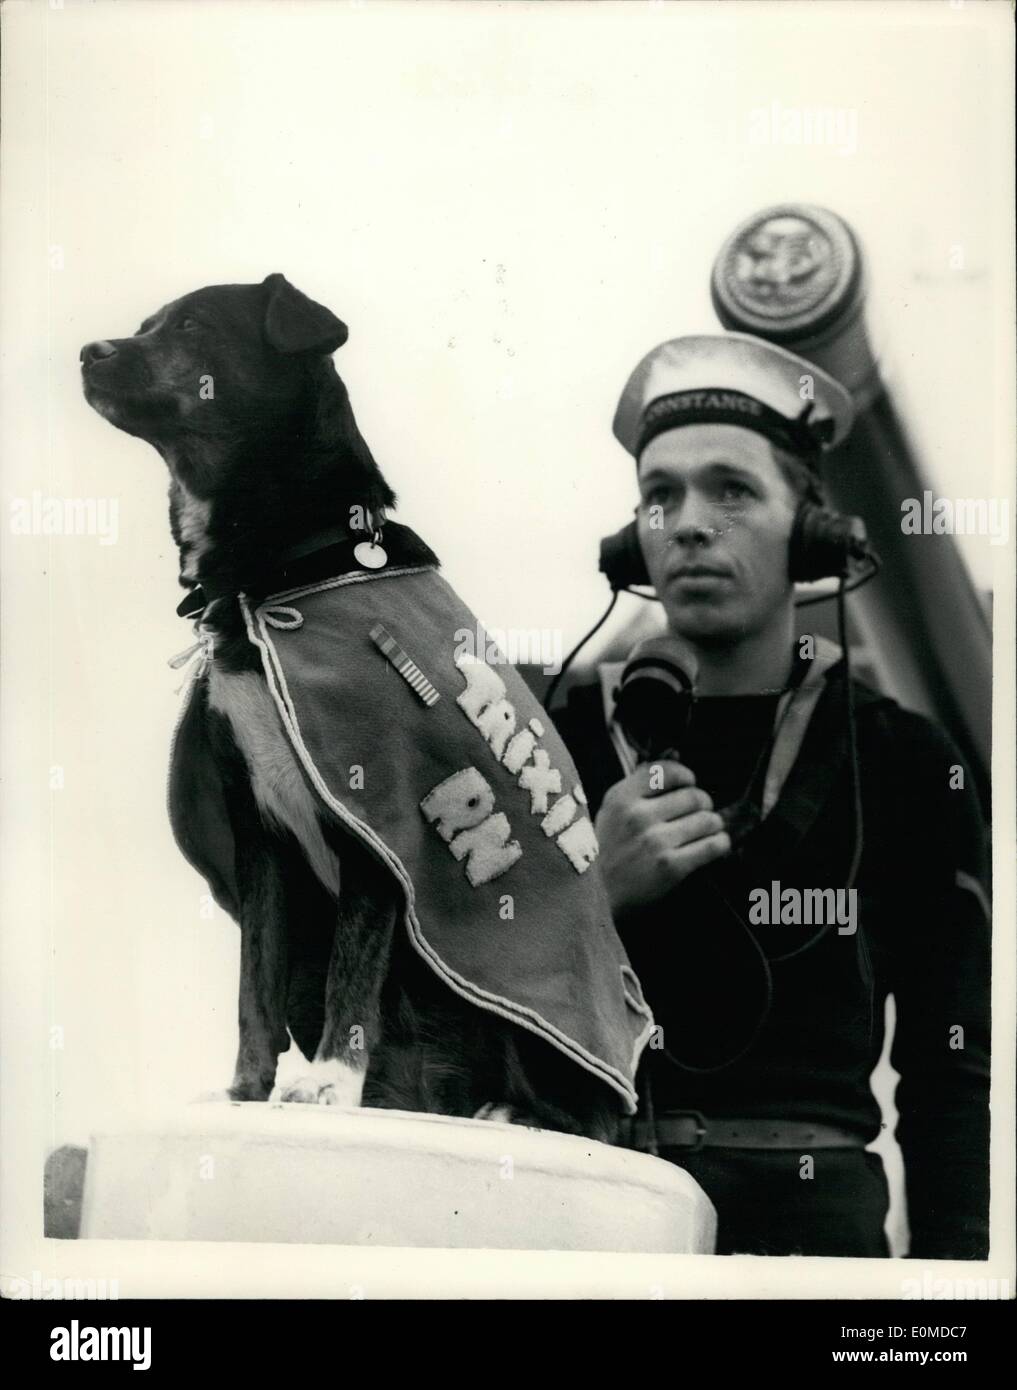 Oct. 10, 1954 - ''Redjacket Trixie R.N.'' Sails In - Wearing Medals..Stray Puppy Who Saw Service In Korea.. Included in the crew of the British destroyer H.M.S. Constance which arrived at Chatham after 8 years foreign service was ''Trixie'' R.N. who was taken abroad the vessel as a mascot - a stray starving puppy in Japan two years ago. A whip round among the crew produced more than twice the Pound 26 needed to pay for her six months quarantine in Britain. Trixie's shipmates will visit her in turn for an long as service duties permit.. Stock Photo